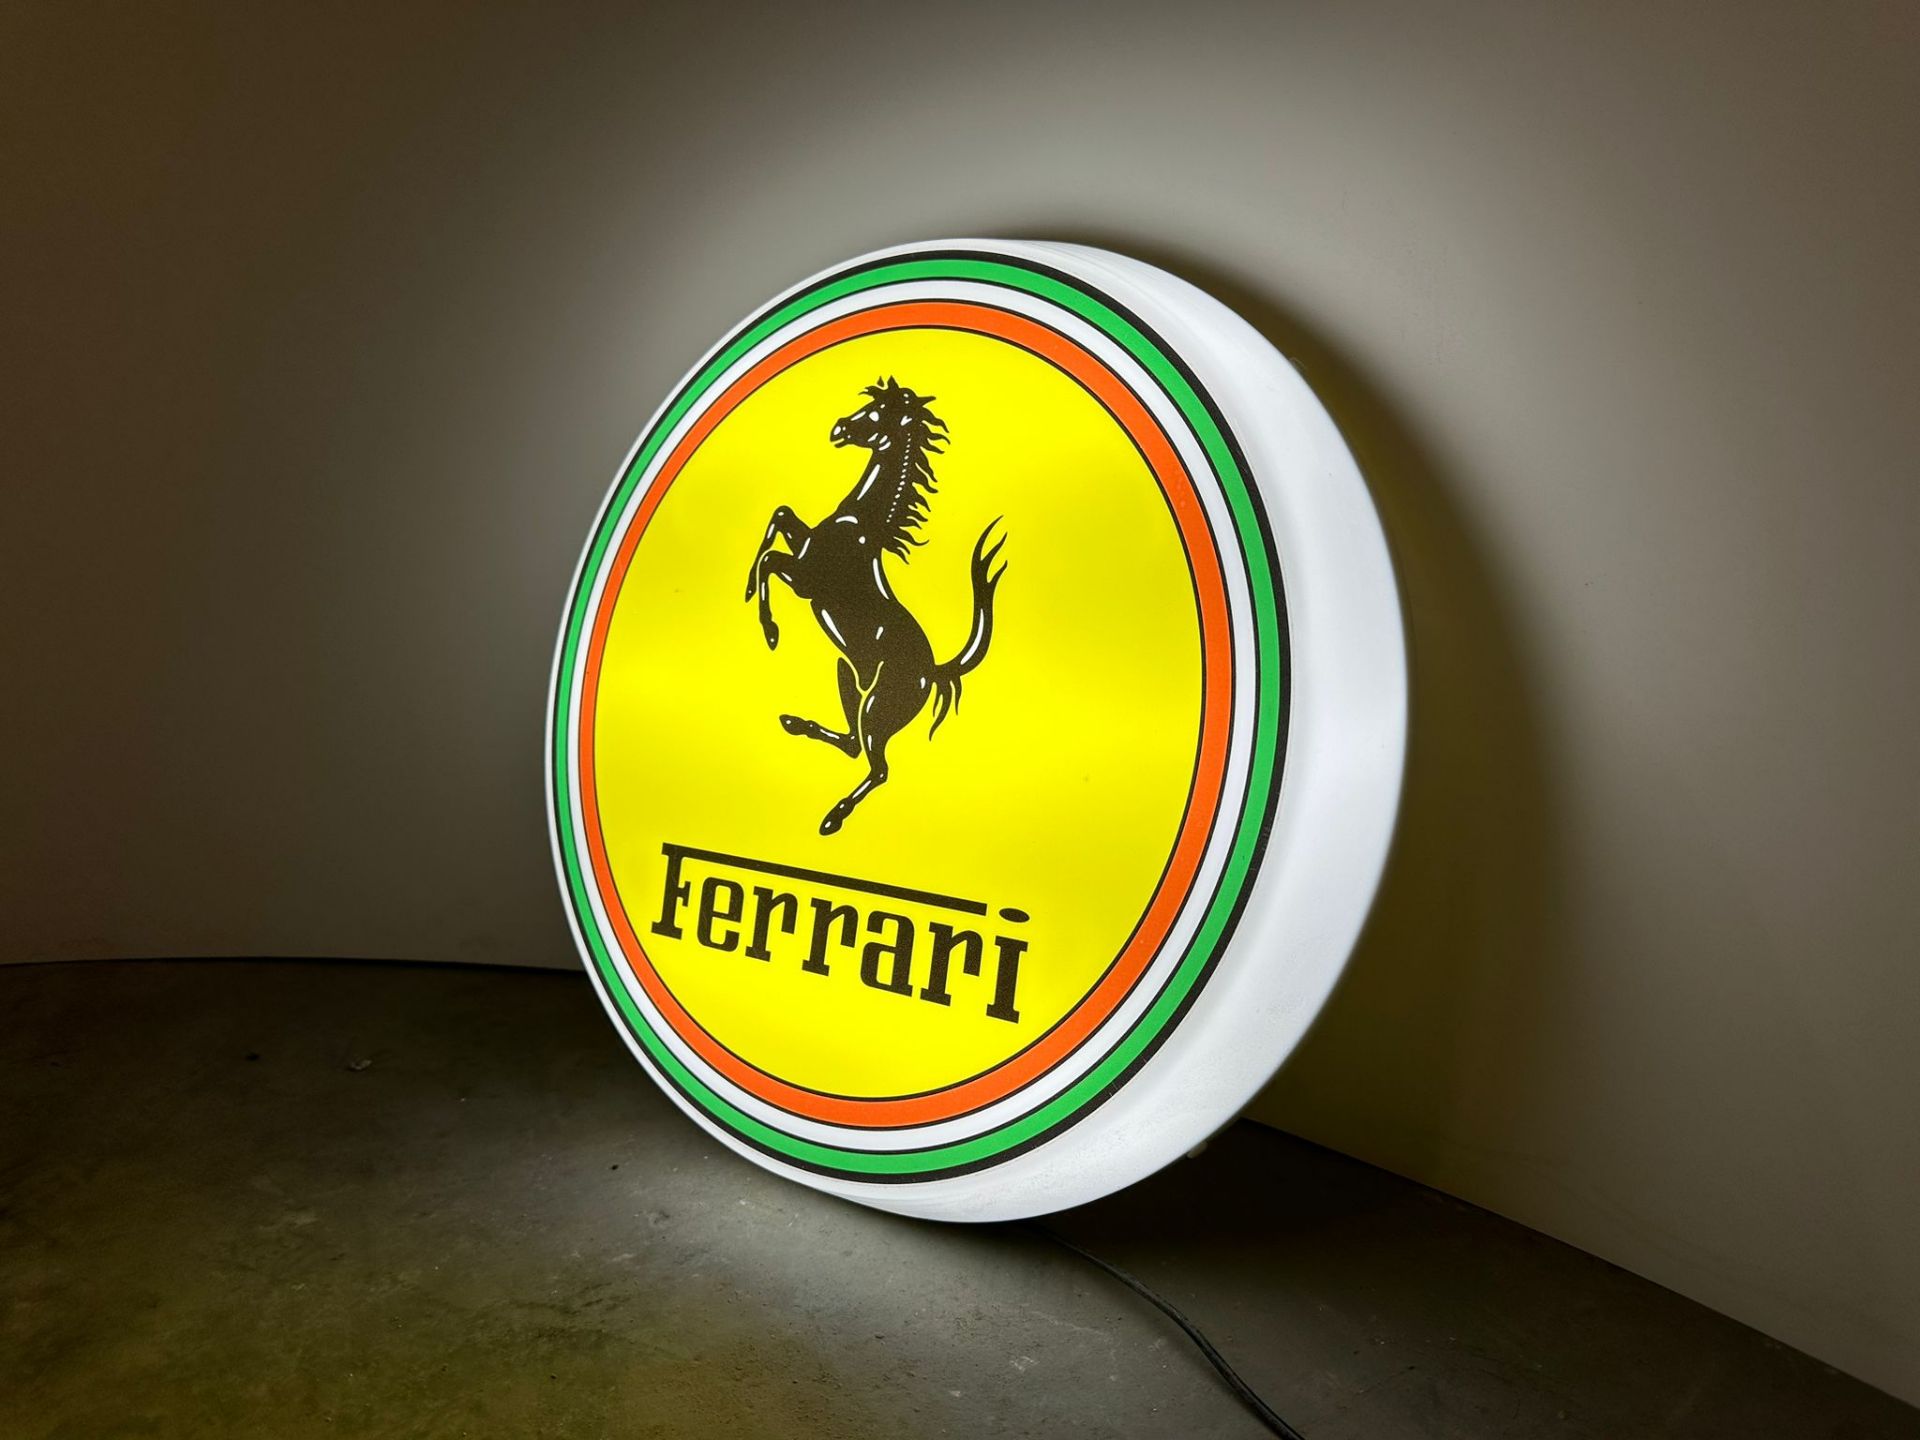 Ferrari fully working illuminated adapted to any country - Image 3 of 6